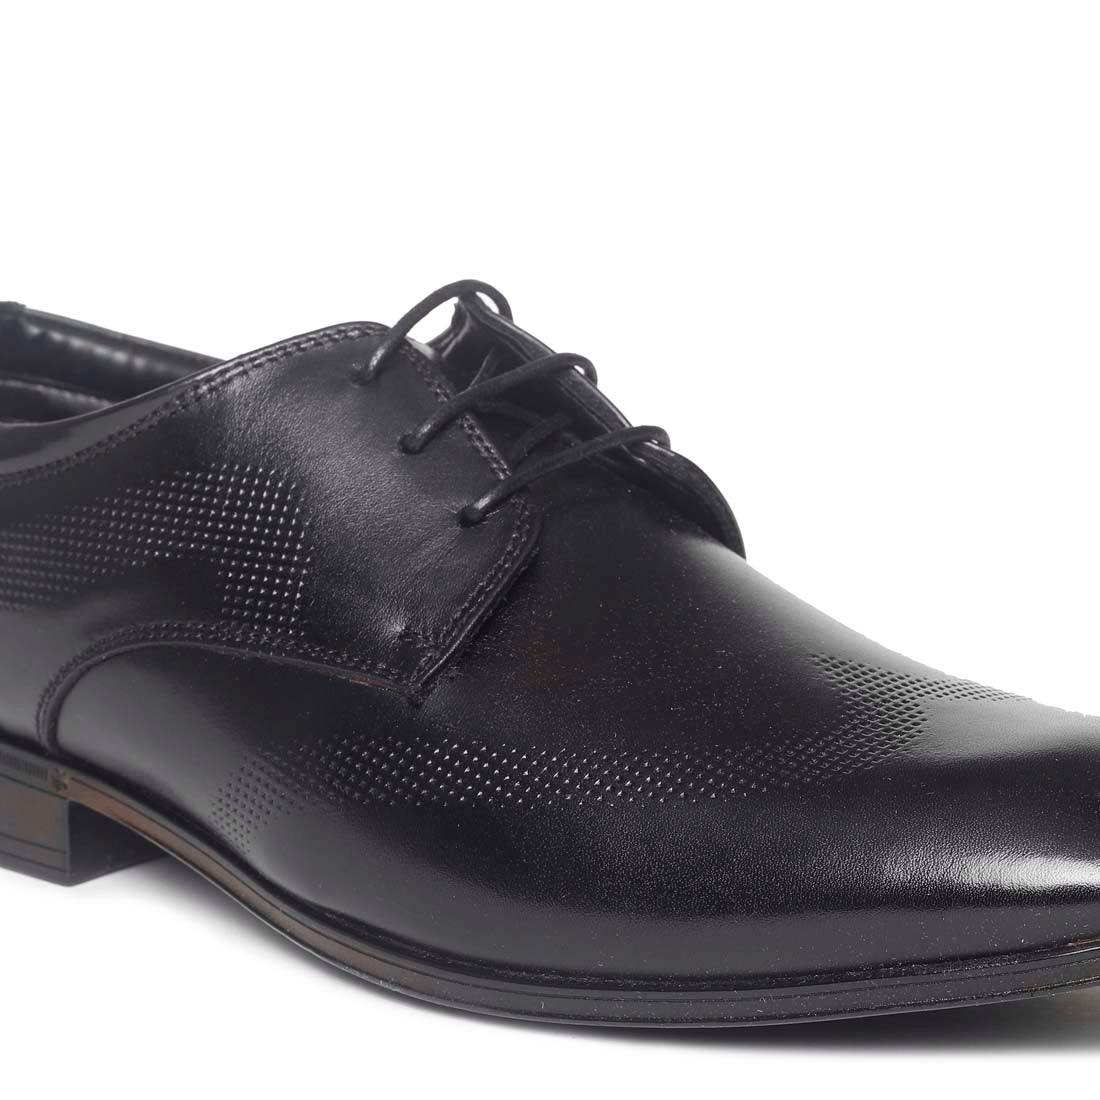 Paragon  RB11222GP Men Formal Shoes | Corporate Office Shoes | Smart &amp; Sleek Design | Comfortable Sole with Cushioning | For Daily &amp; Occasion Wear